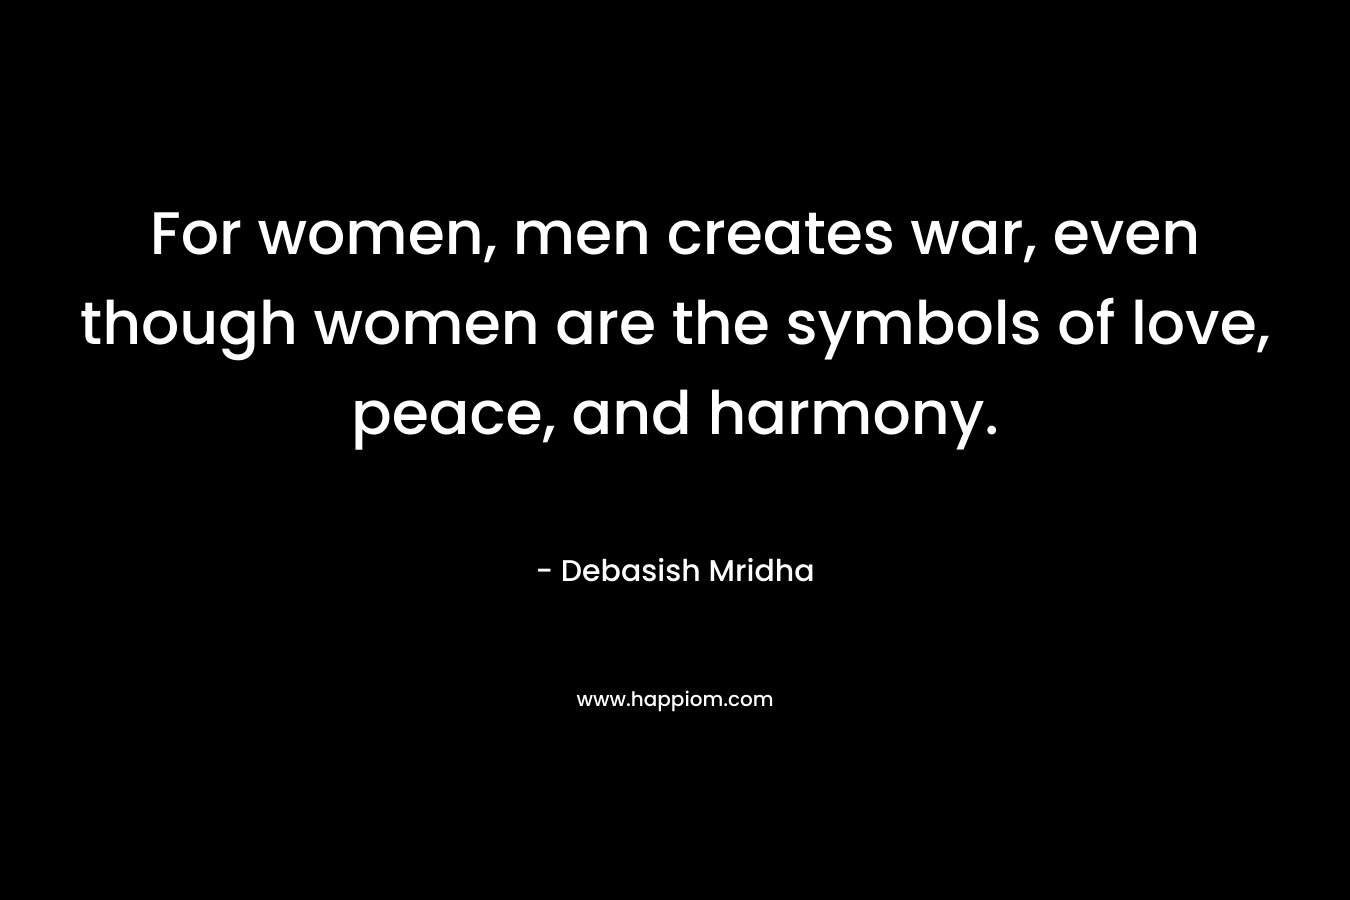 For women, men creates war, even though women are the symbols of love, peace, and harmony.